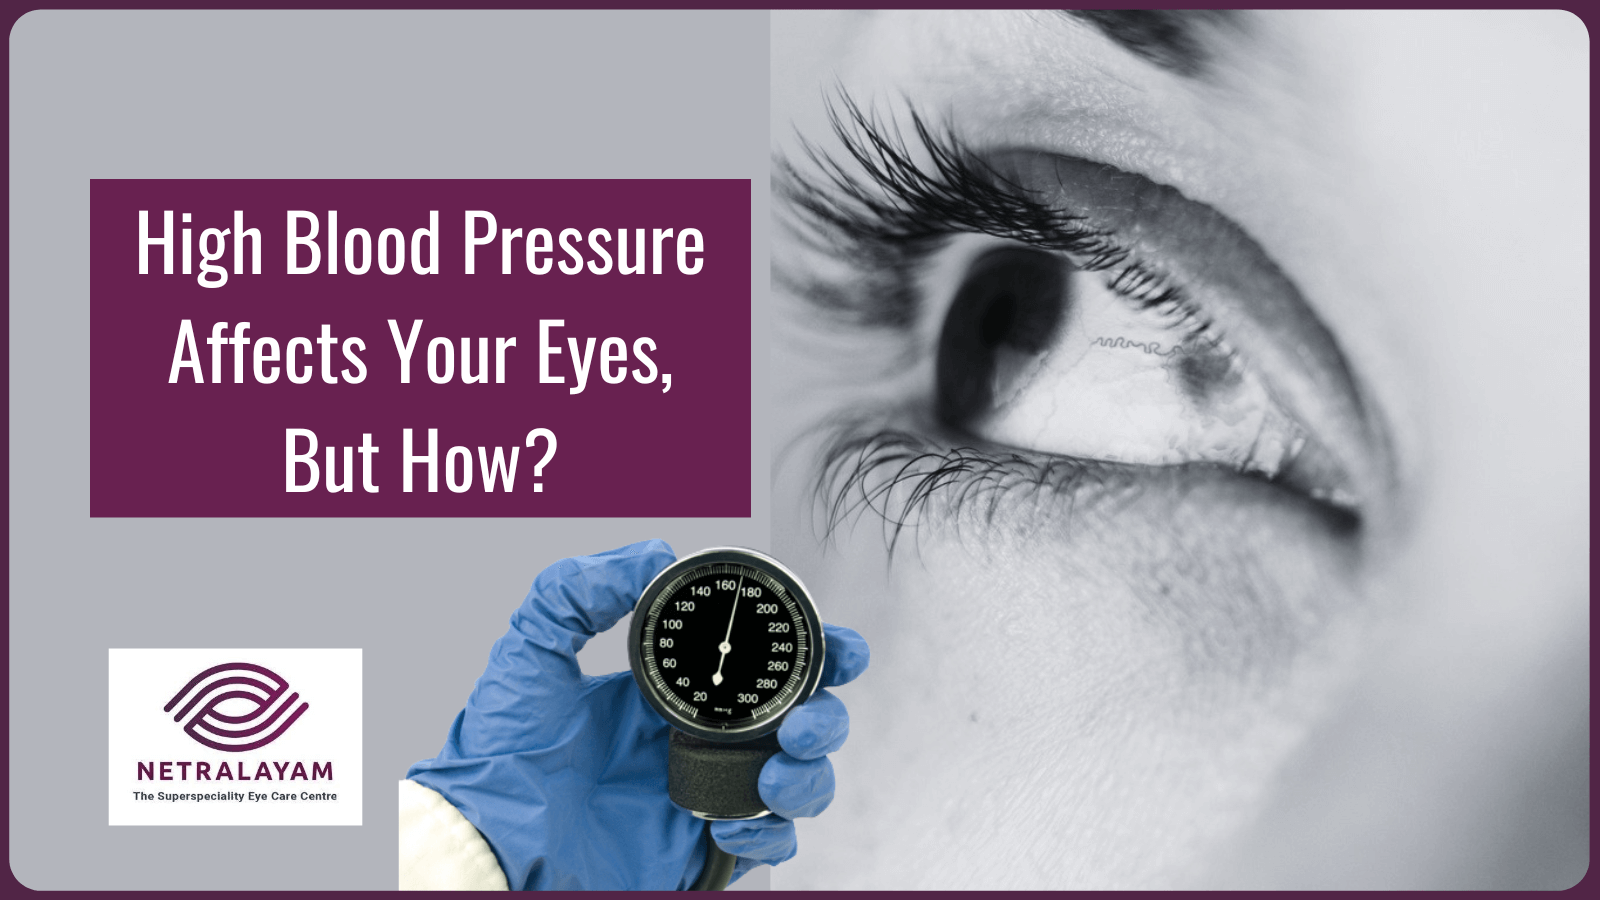 High Blood Pressure Affects Your Eyes, But How?